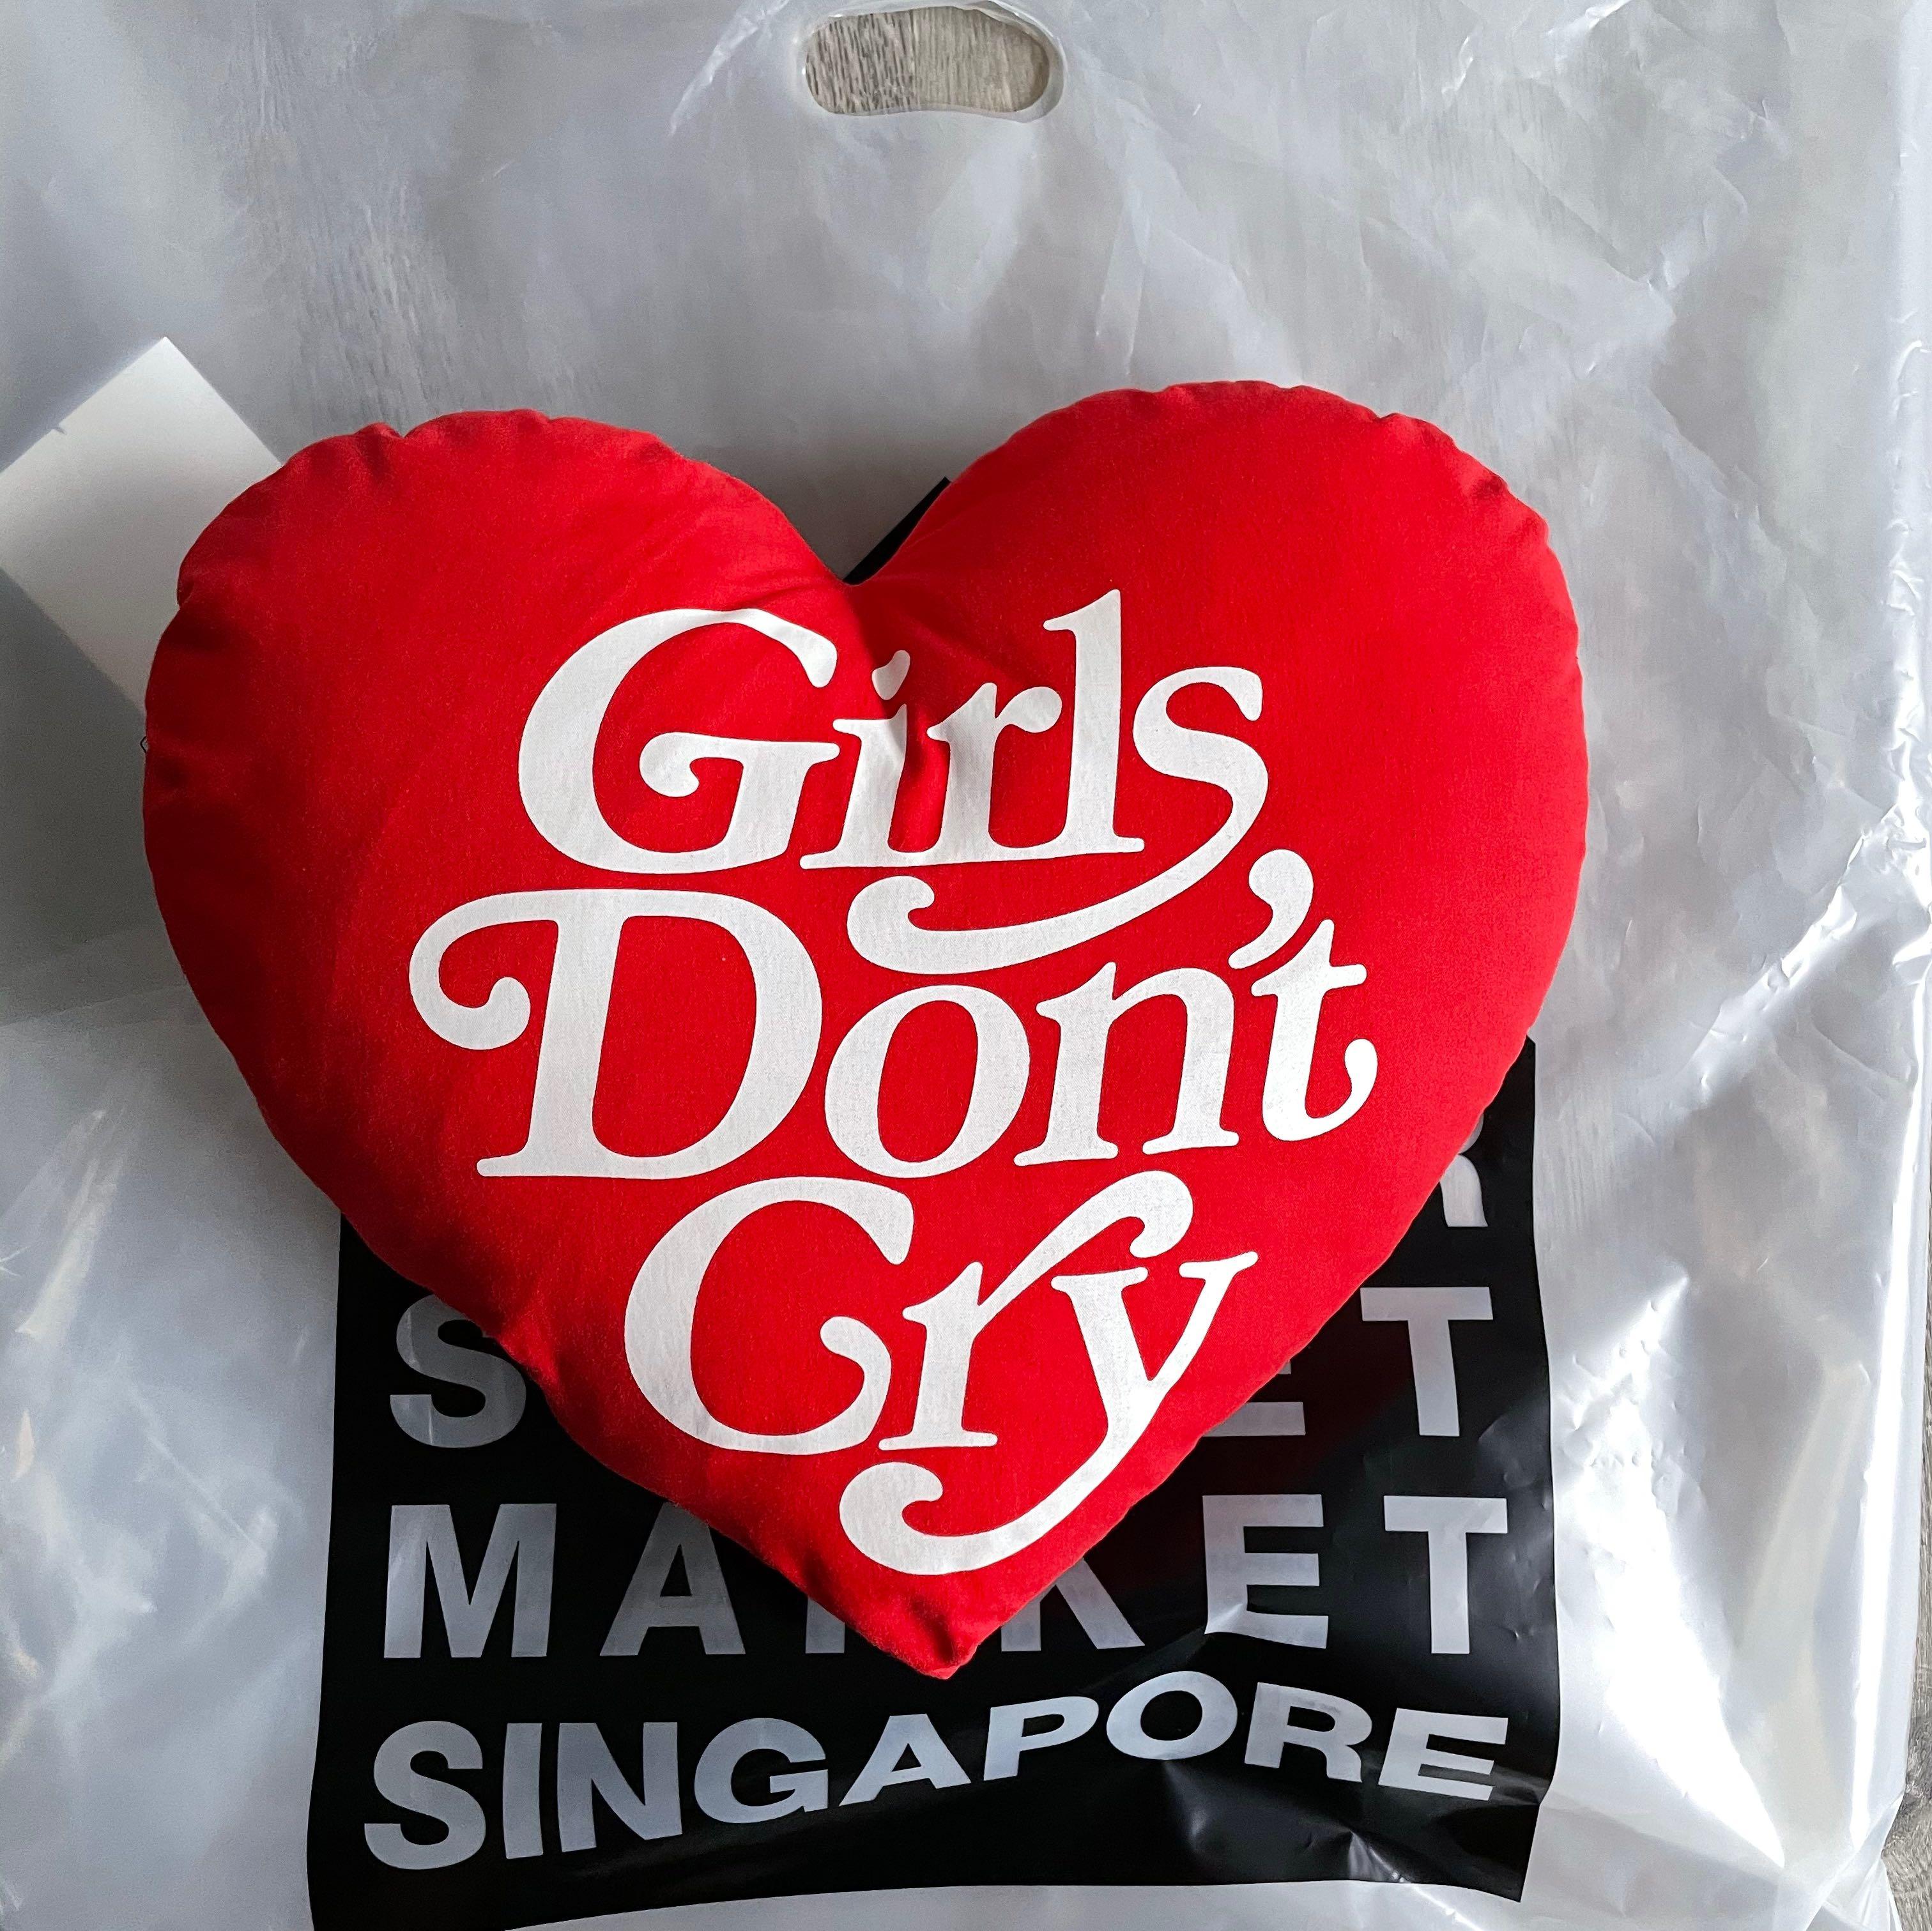 GIRLS DON'T CRY HEART SHAPE PILLOW (RED), Men's Fashion, Tops ...